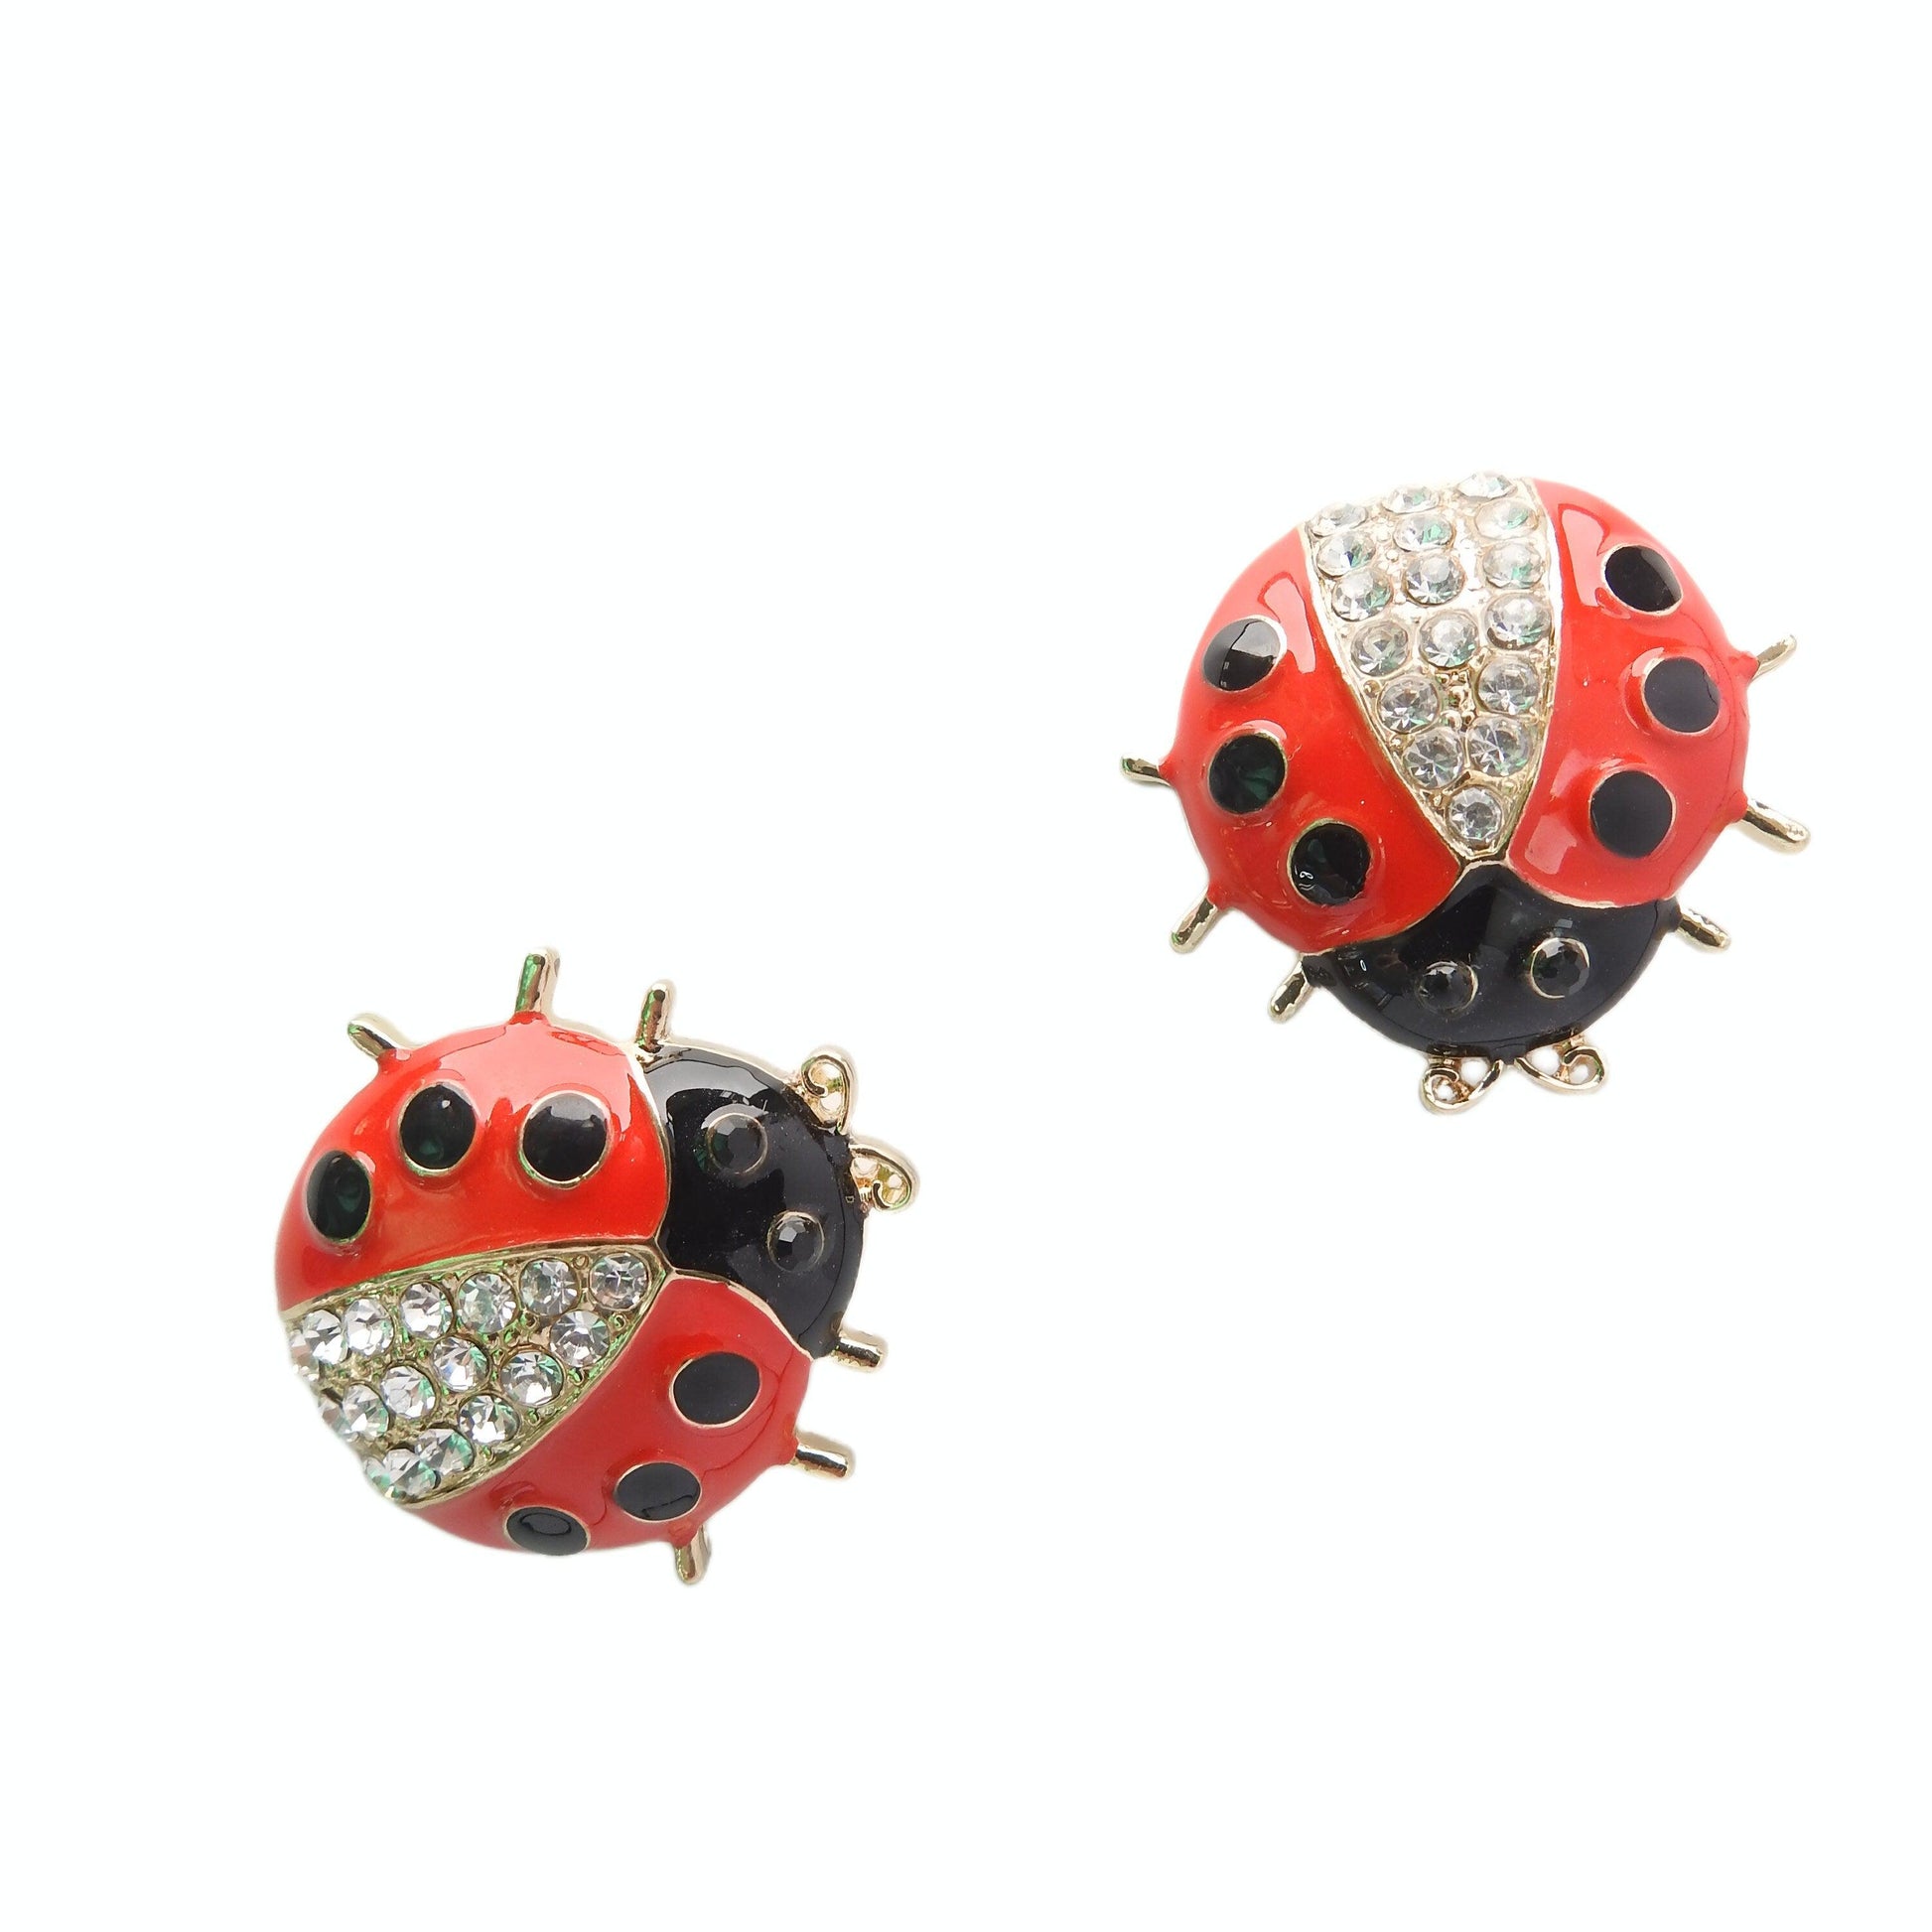 Red and black decorative ladybug buttons snap. Lot of 2. 30 mm. Ideal for lady bug snaps jewelry, insect-inspired fashion or fancy costume